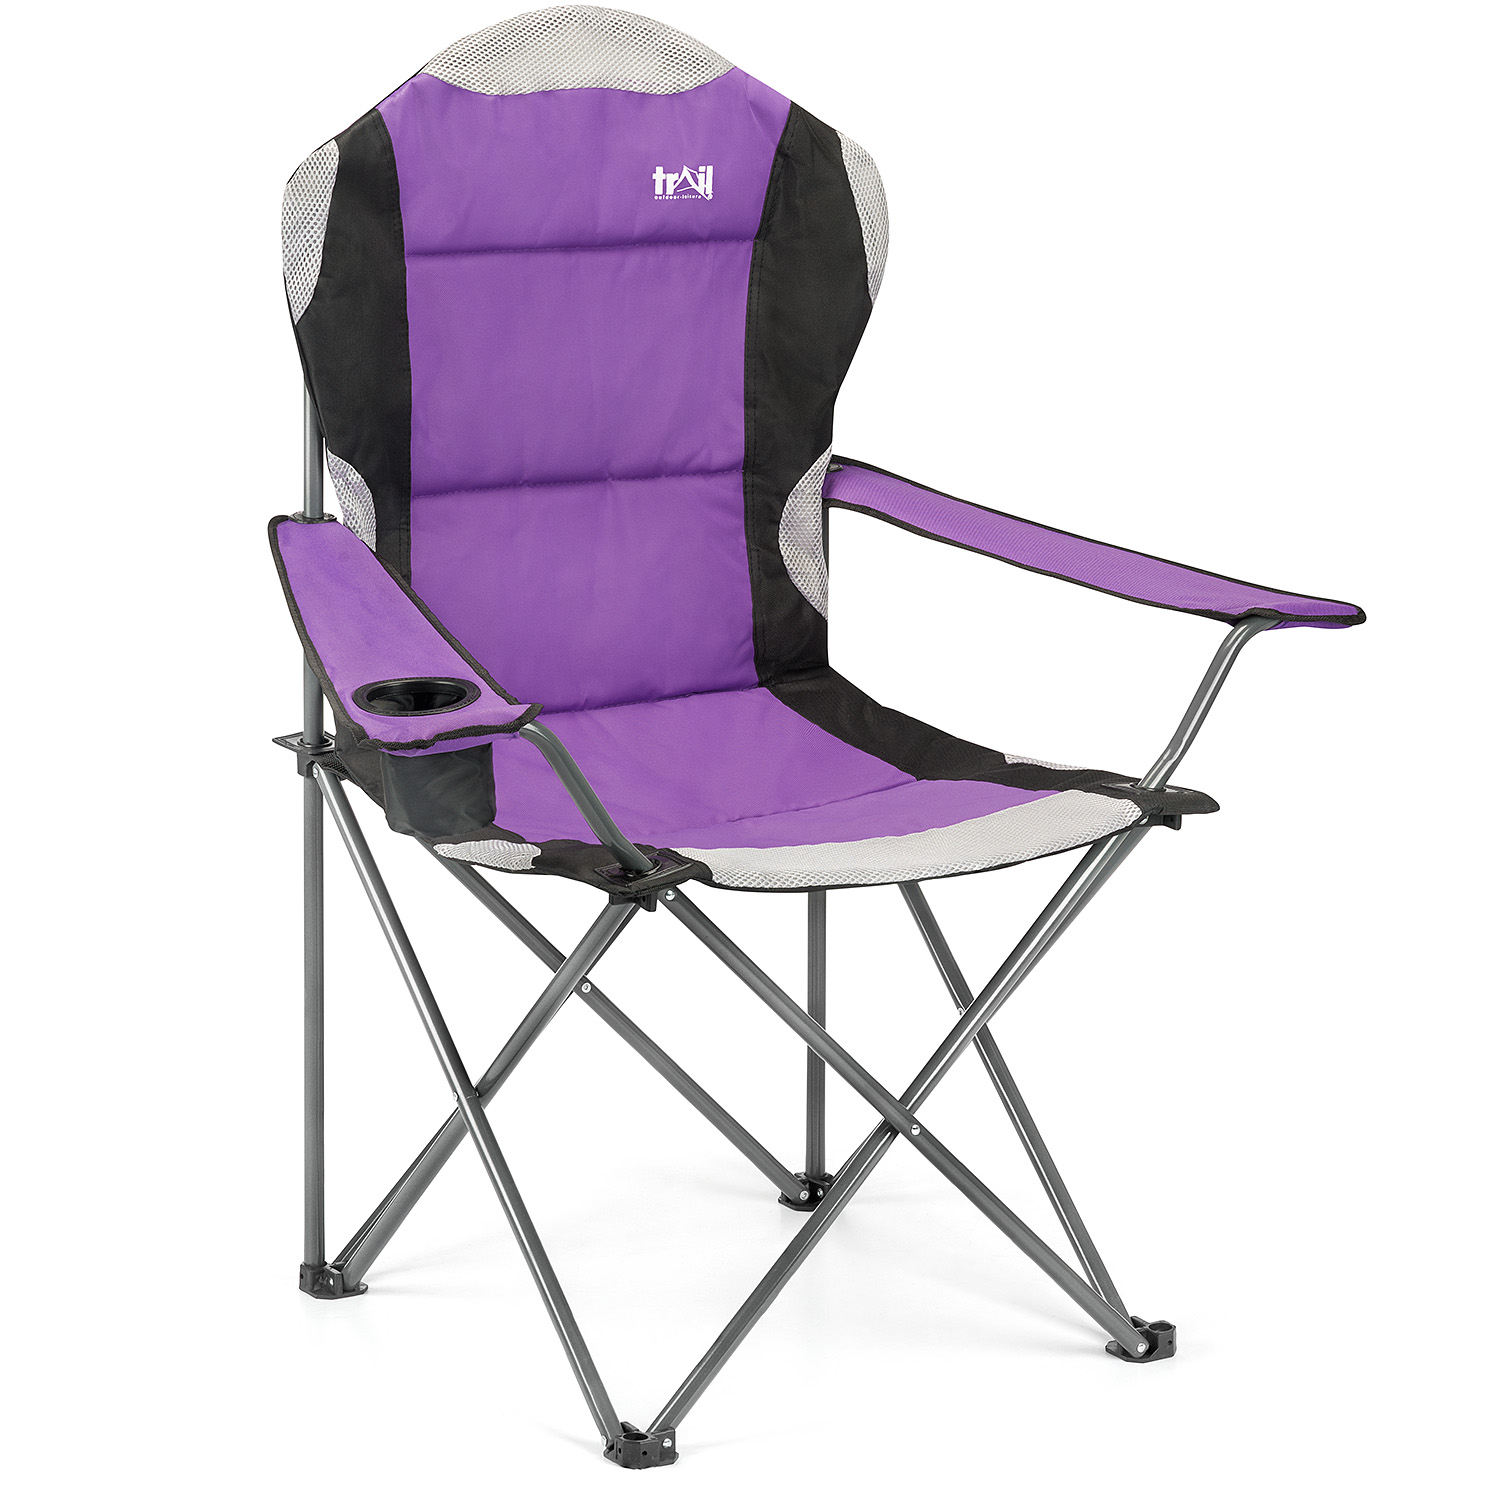 essel Deluxe Sedia Campeggio Sedia Pieghevole Sedia da Pesca data-mtsrclang=en-US href=# onclick=return false; 							show original title Details about   Camping-Klappsessel Deluxe Camping Chair Folding Chair Chair Fishing 